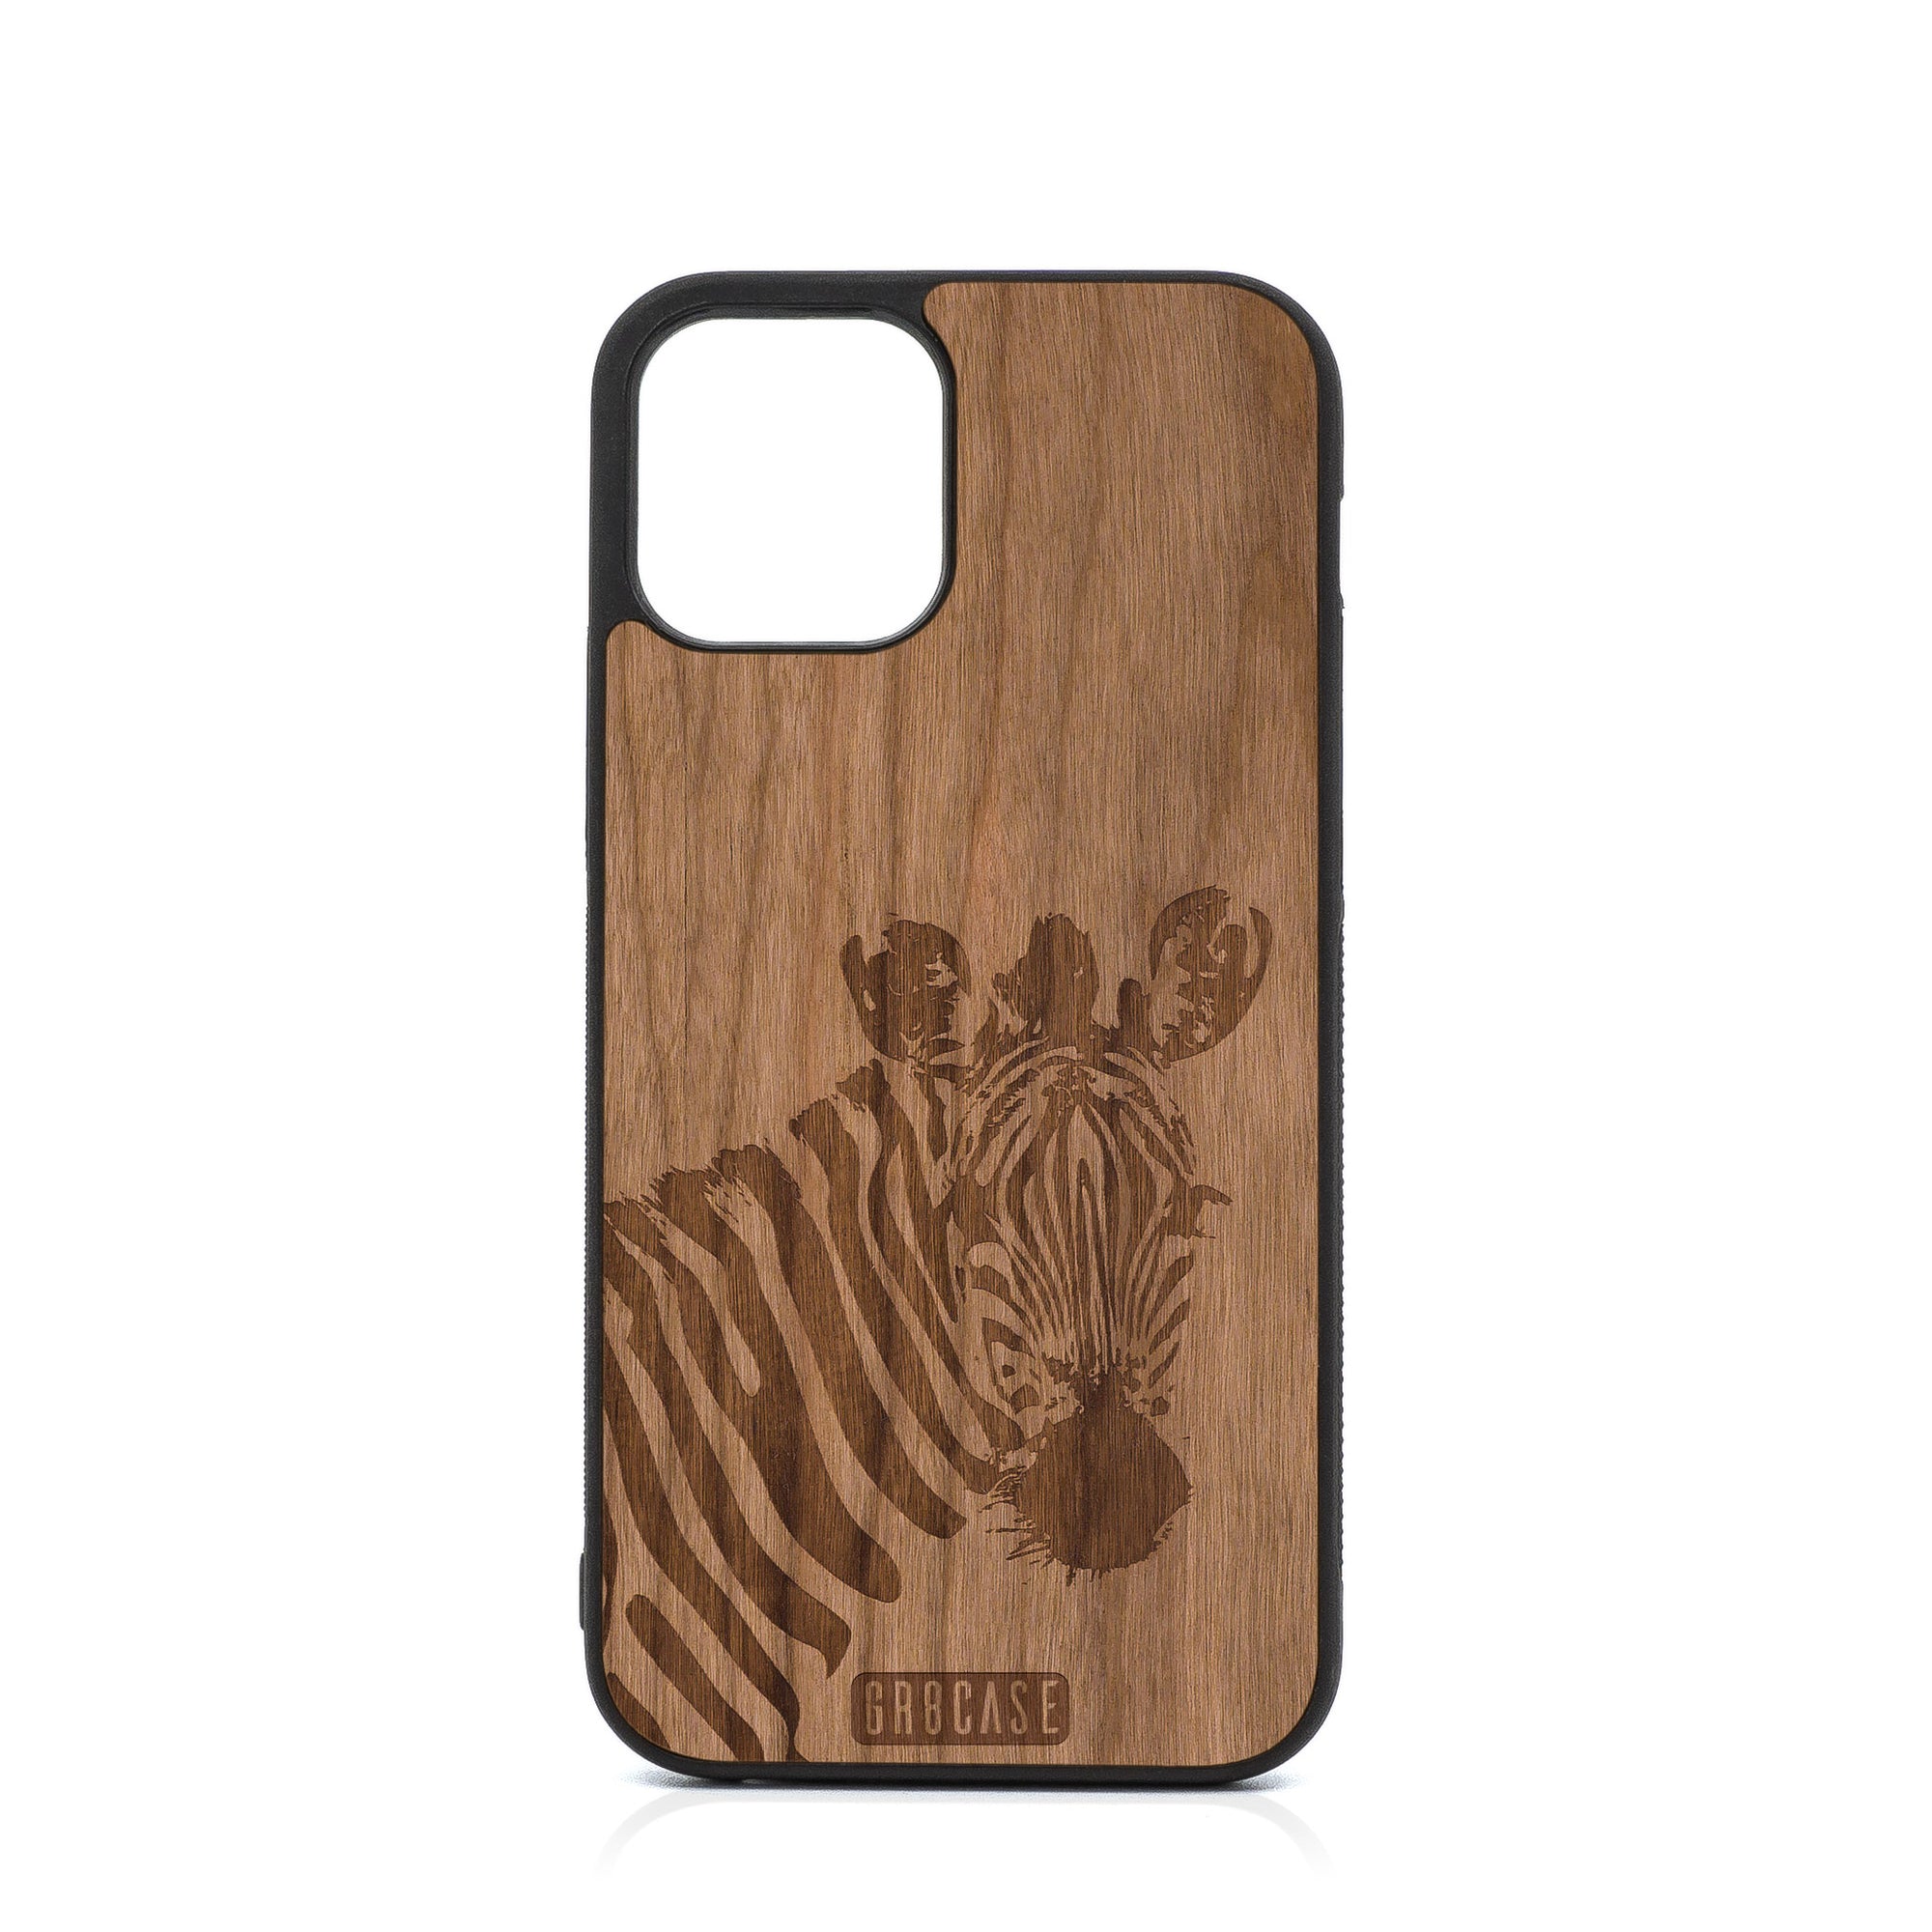 Lookout Zebra Design Wood Case For iPhone 12 Pro